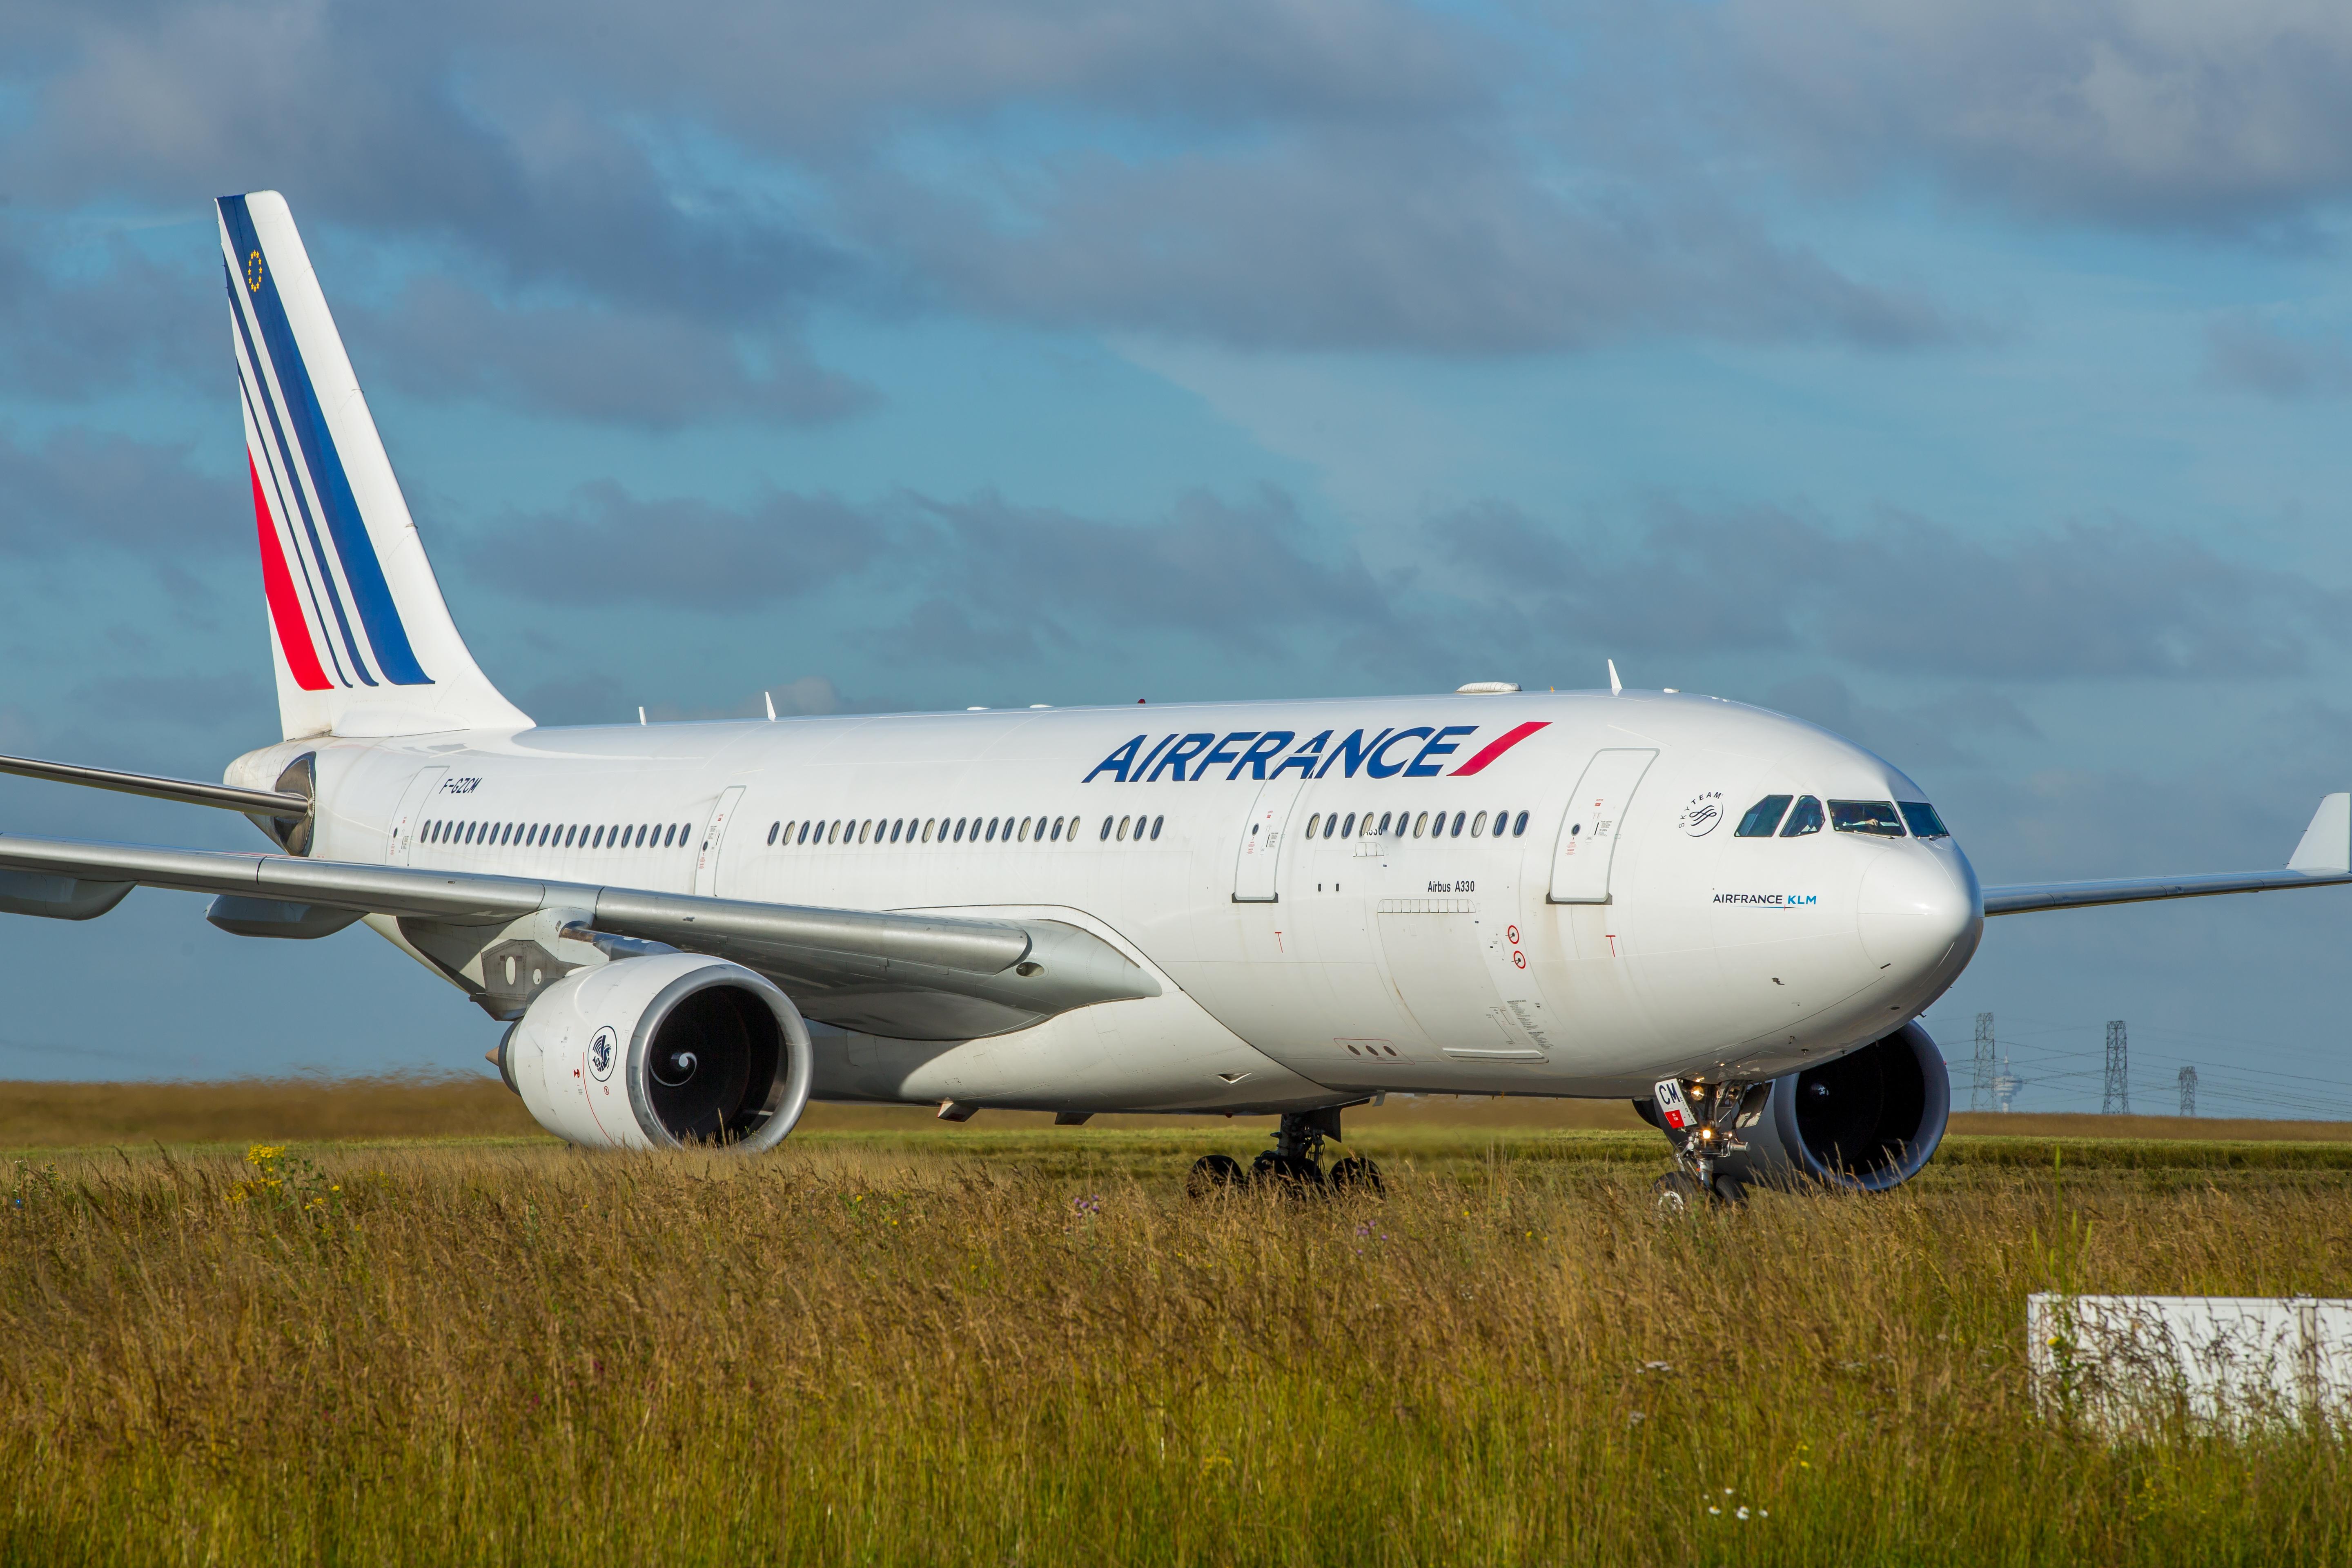 France Pledges To Help Pandemic-Hit Air France - Aviation Week Network